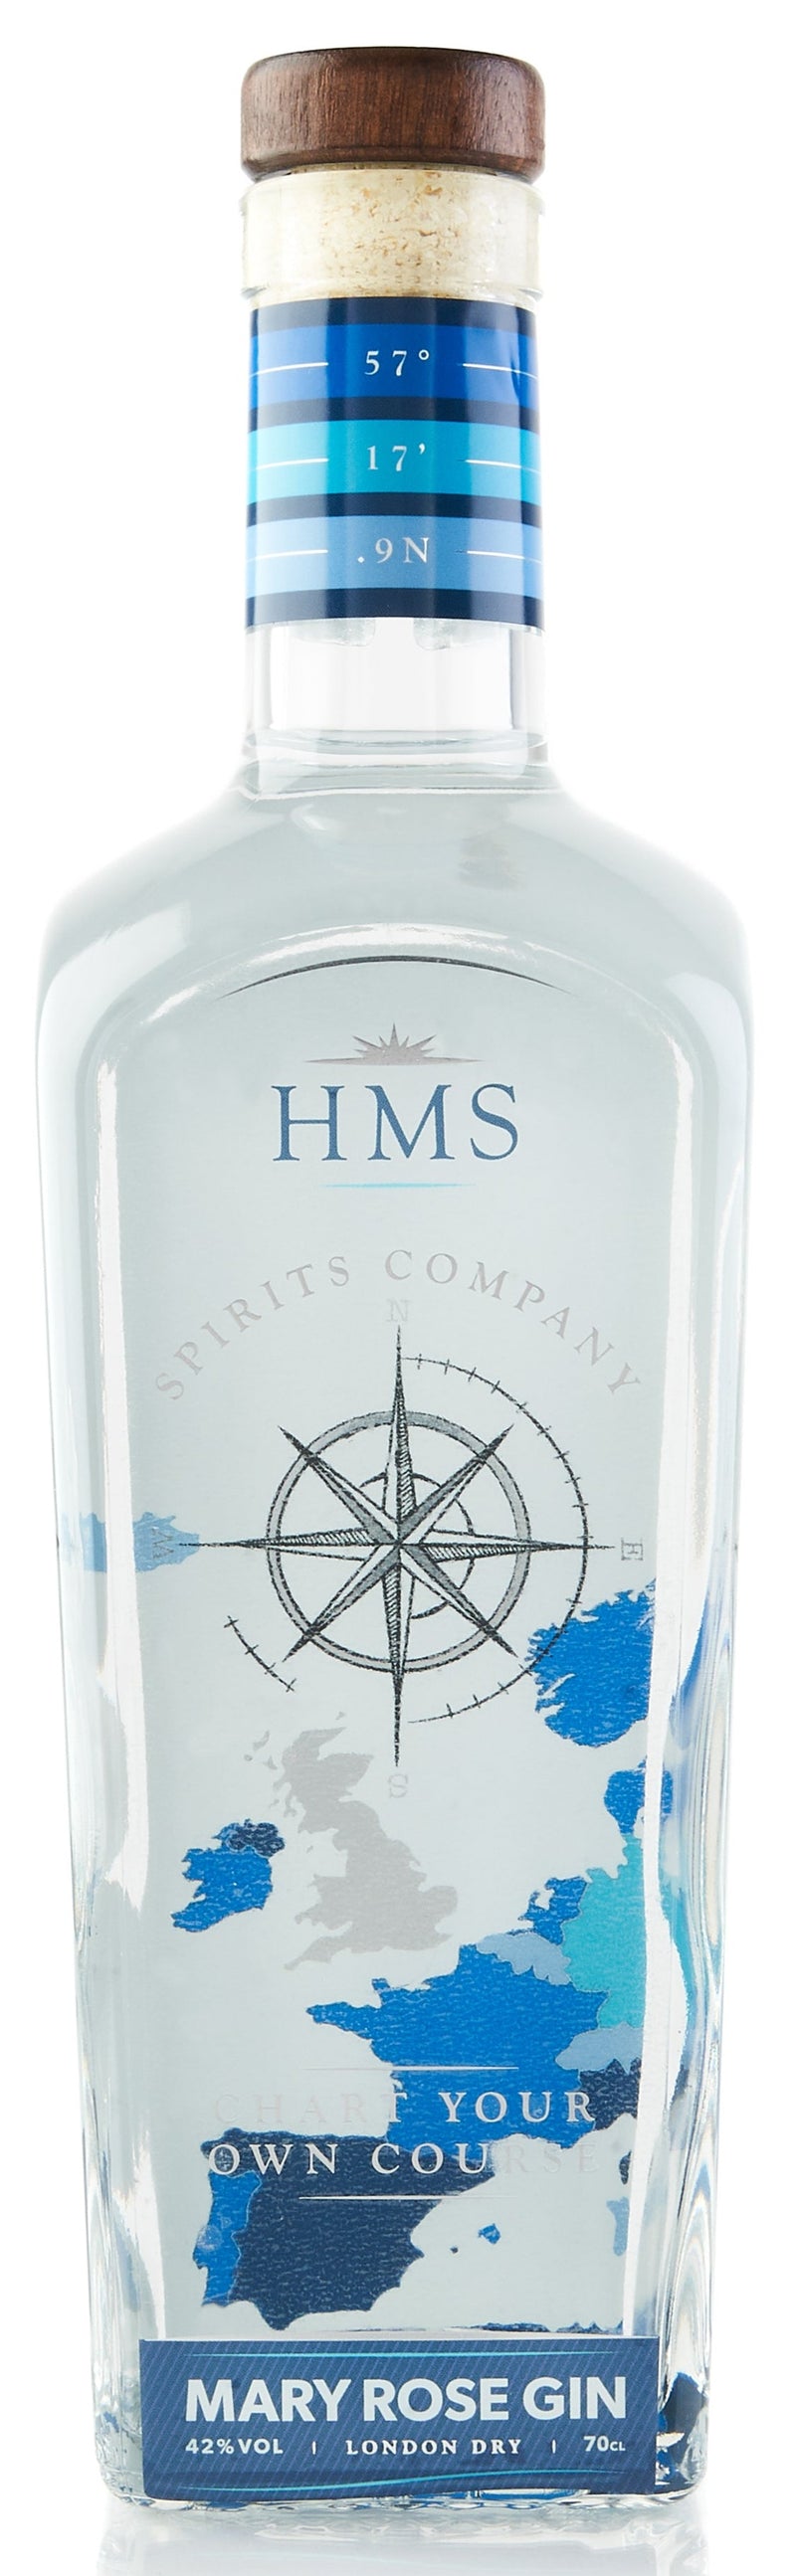 HMS Mary Rose London Dry Gin 70cl